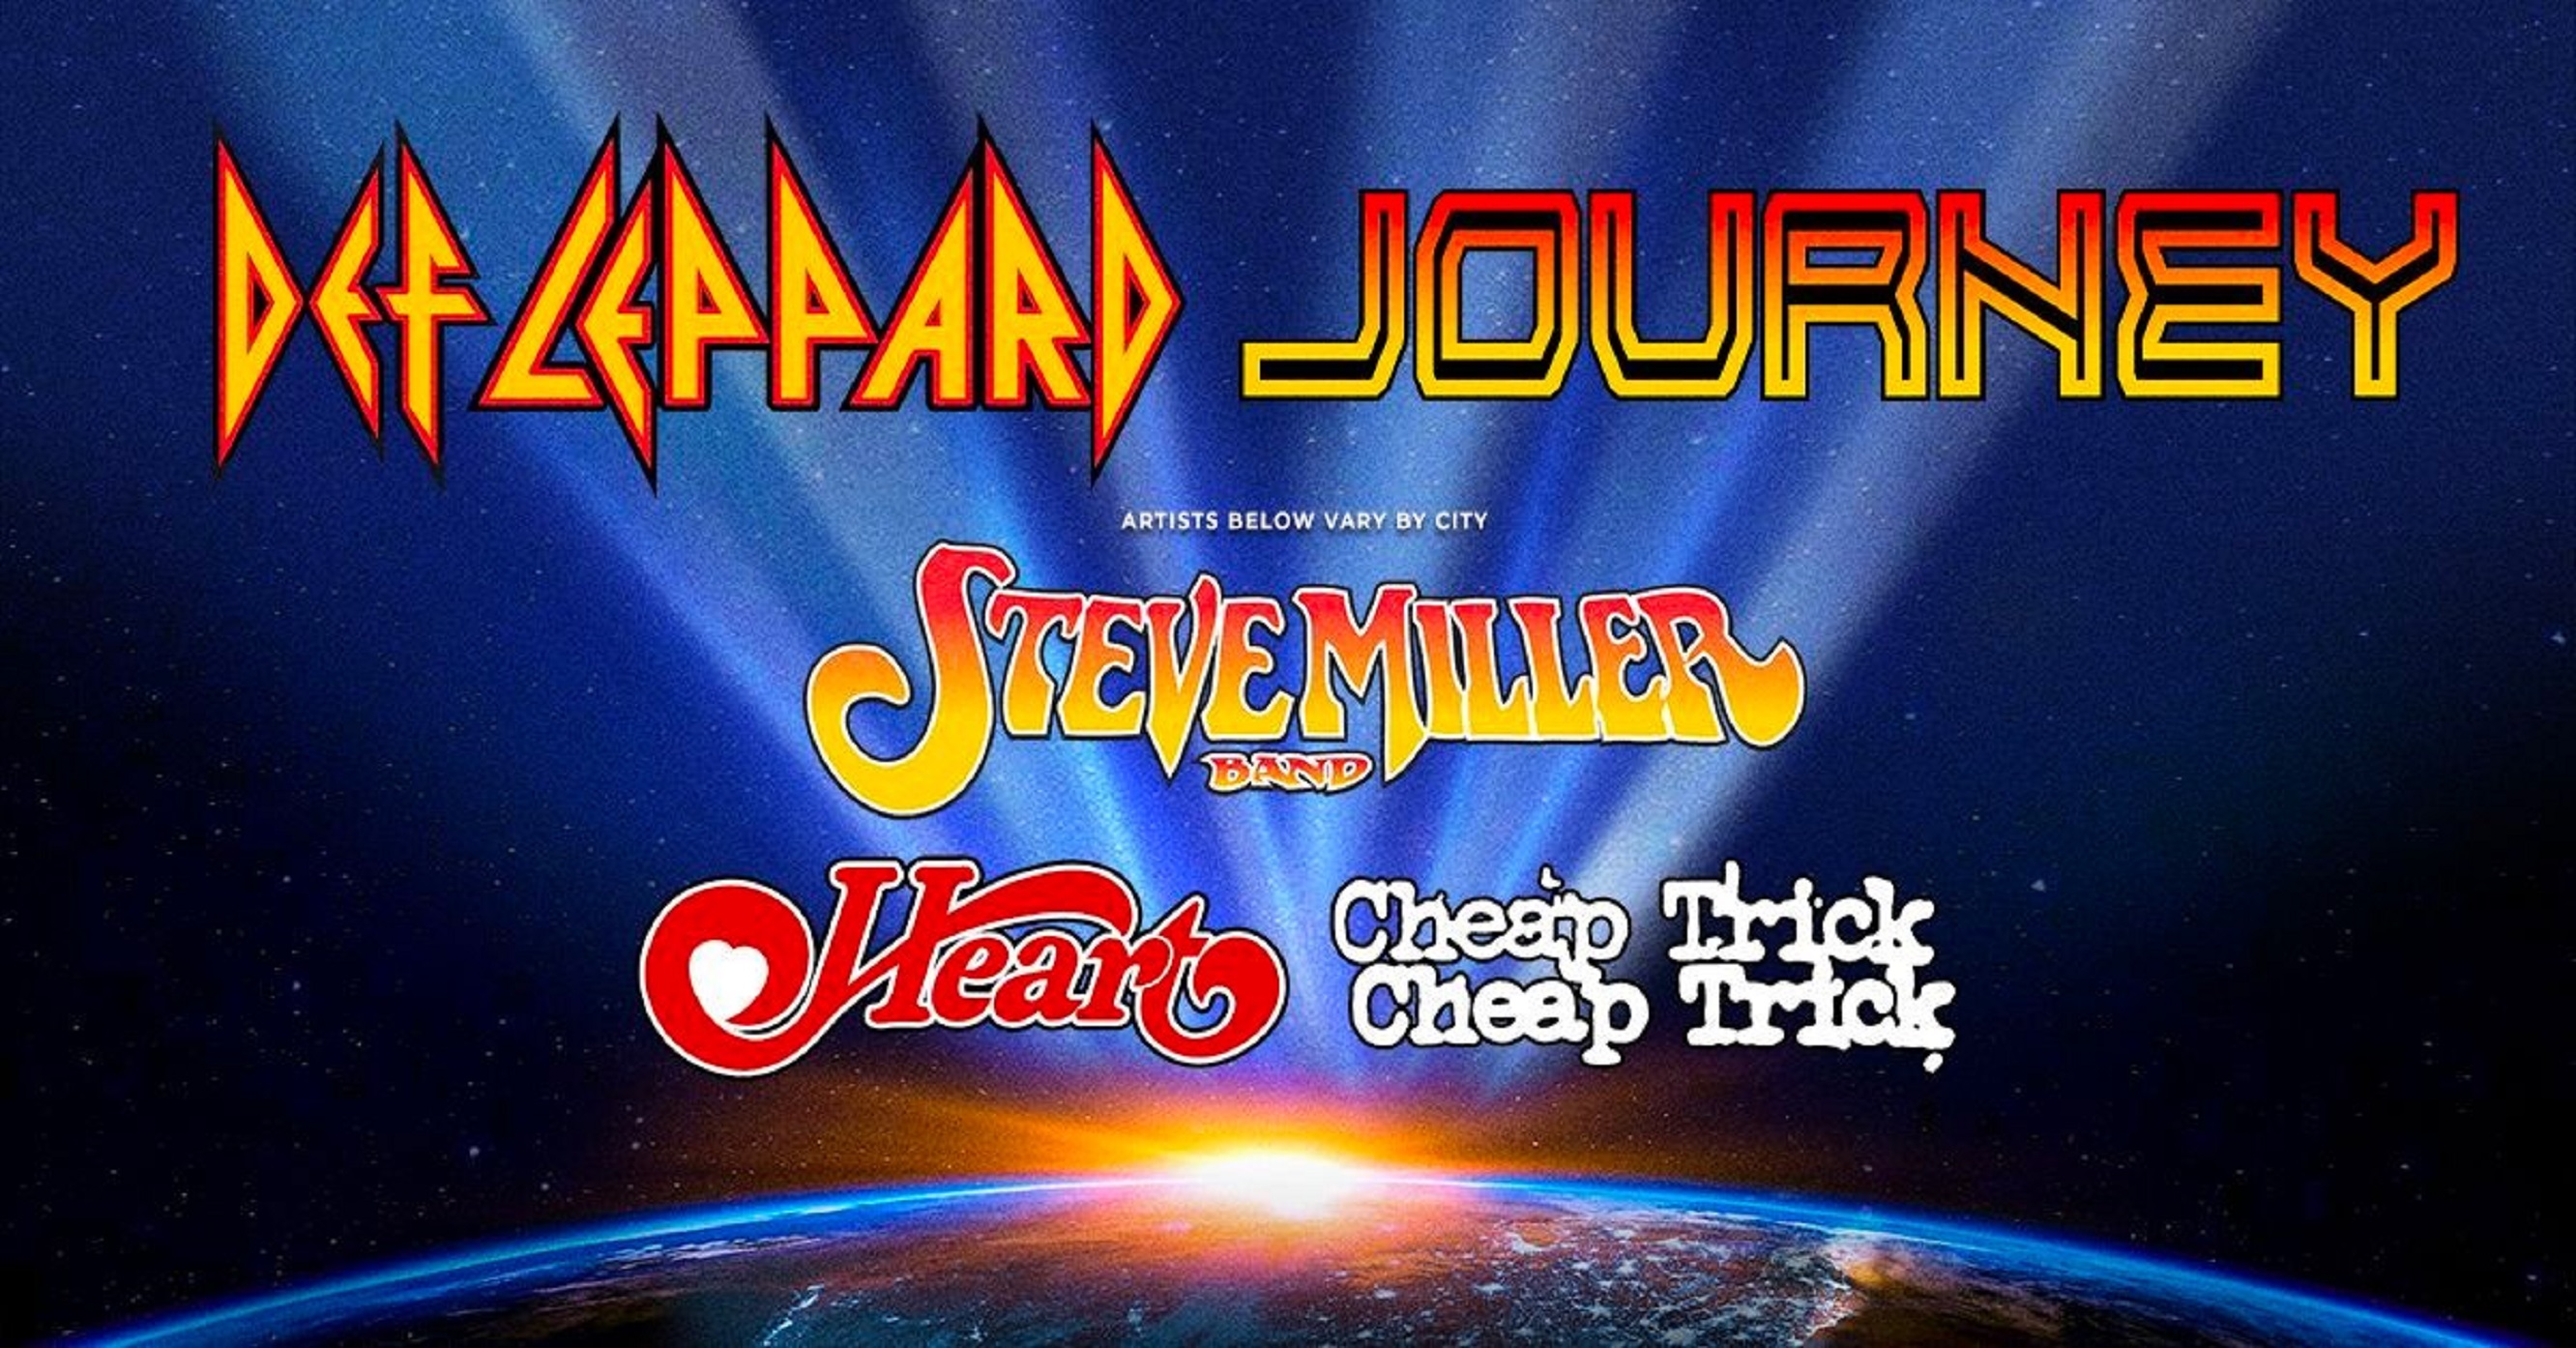 DEF LEPPARD AND JOURNEY ANNOUNCE SUMMER STADIUM TOUR